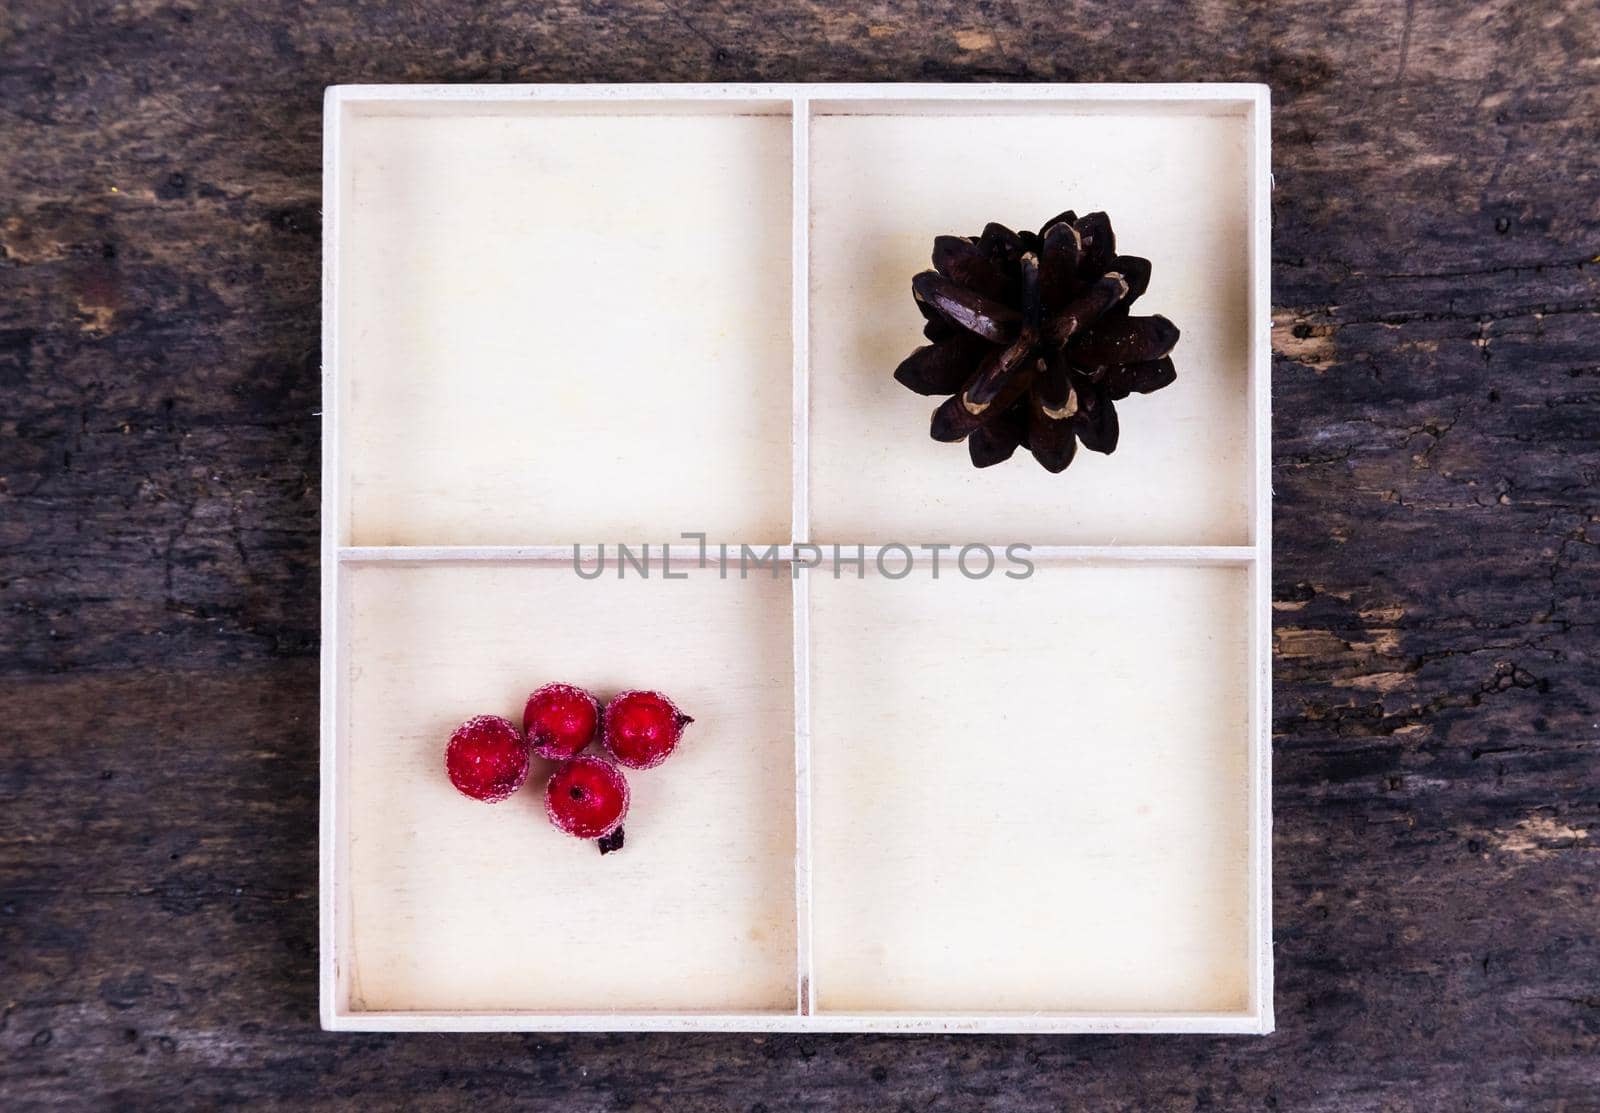 A white box with compartments on a wooden background filled with tree cone and rowan berries.